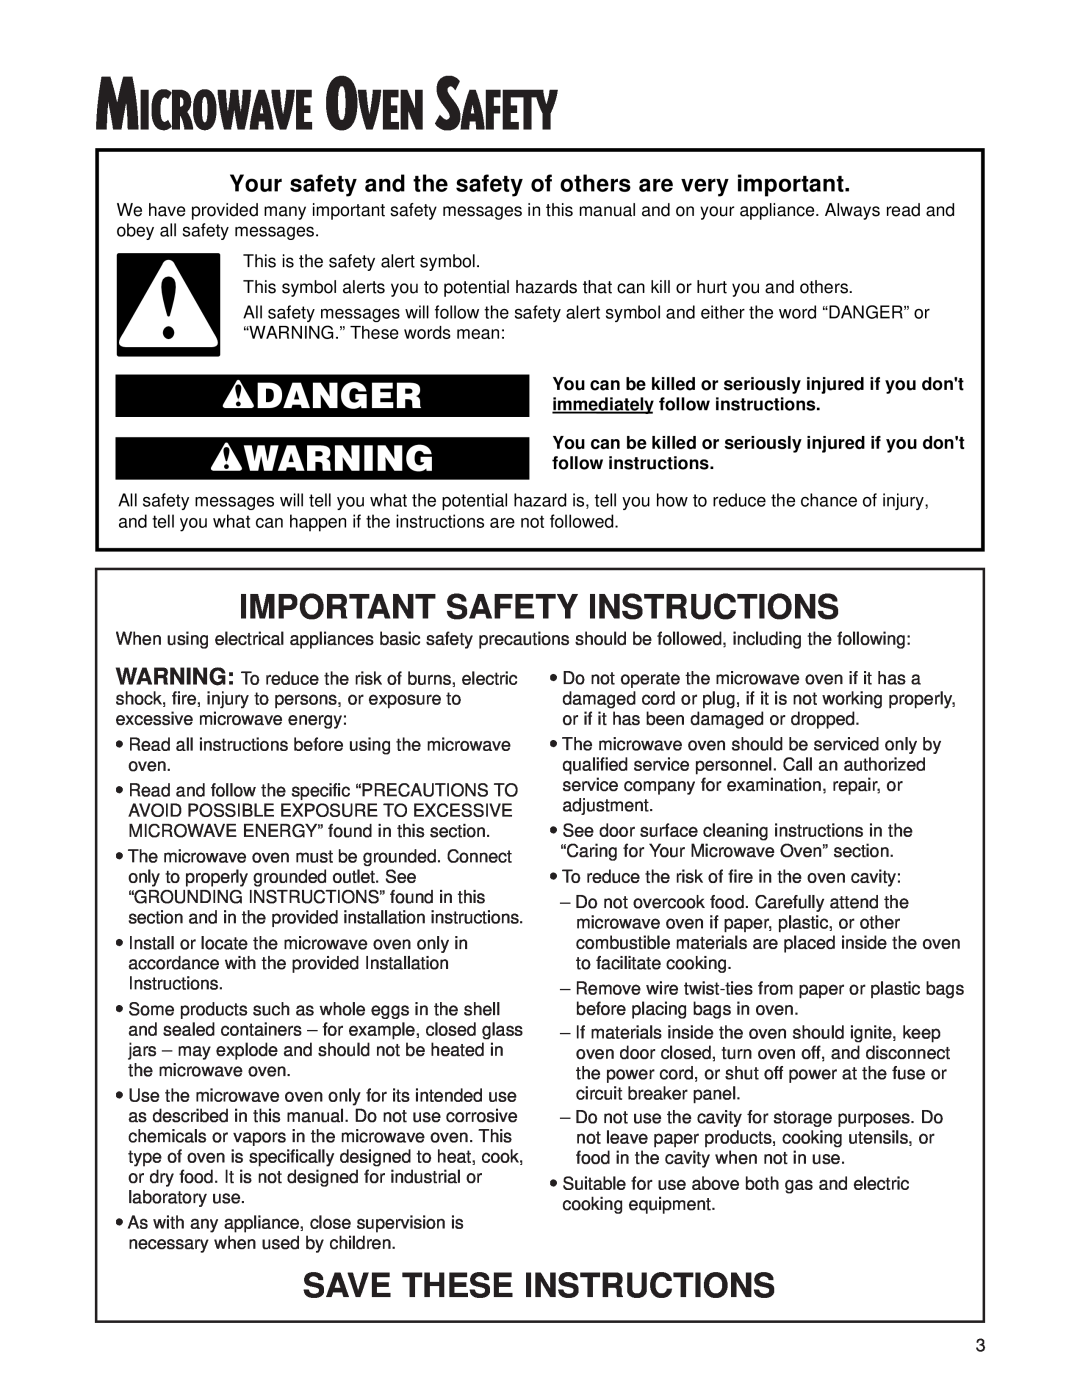 Whirlpool MH8150XJ Microwave Oven Safety, wDANGER wWARNING, Important Safety Instructions, Save These Instructions 